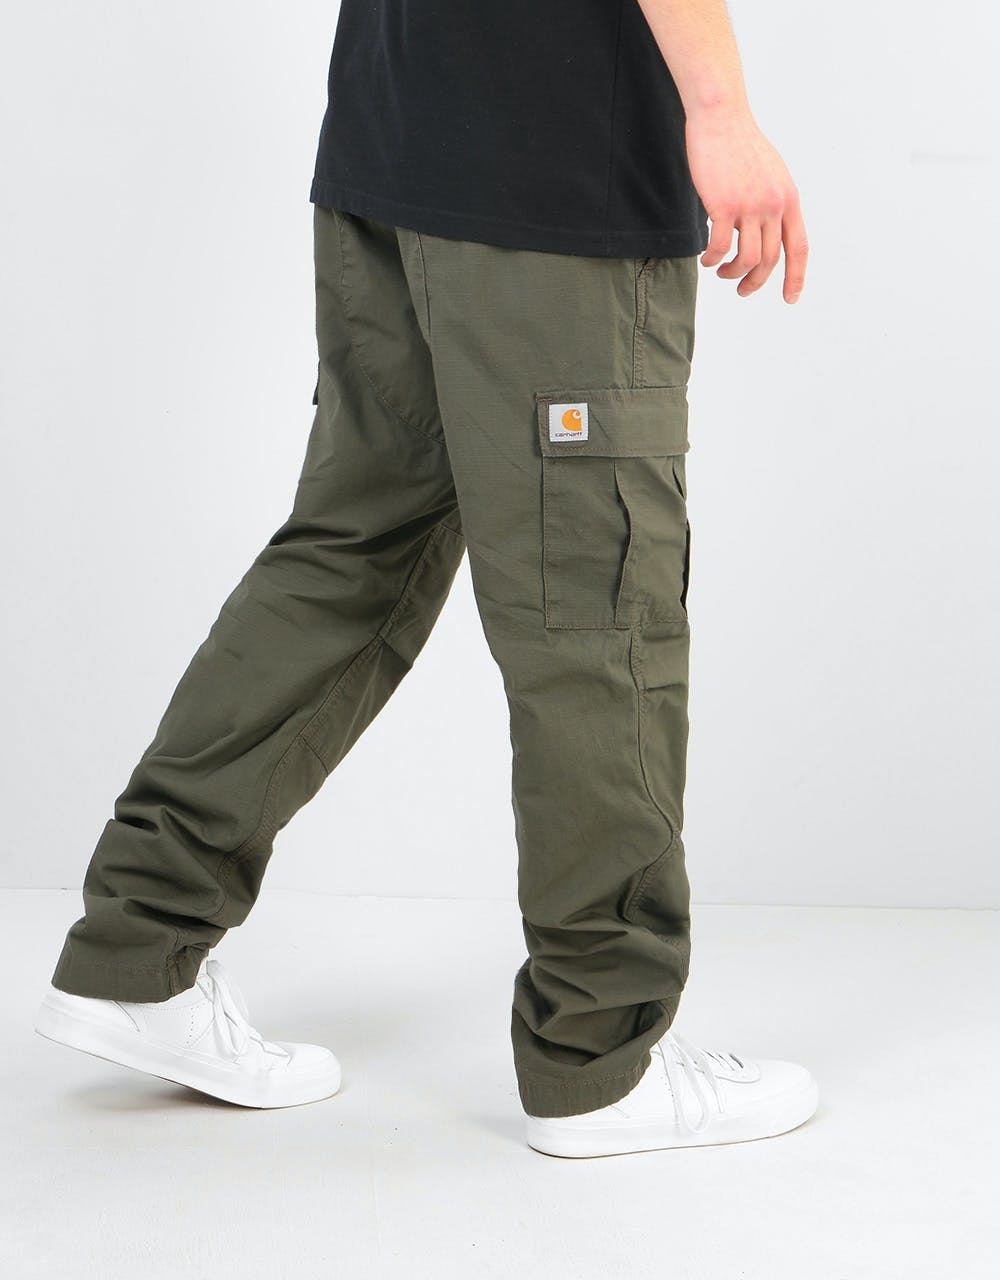 Carhartt WIP Aviation Pant - Cypress (Rinsed) – Route One